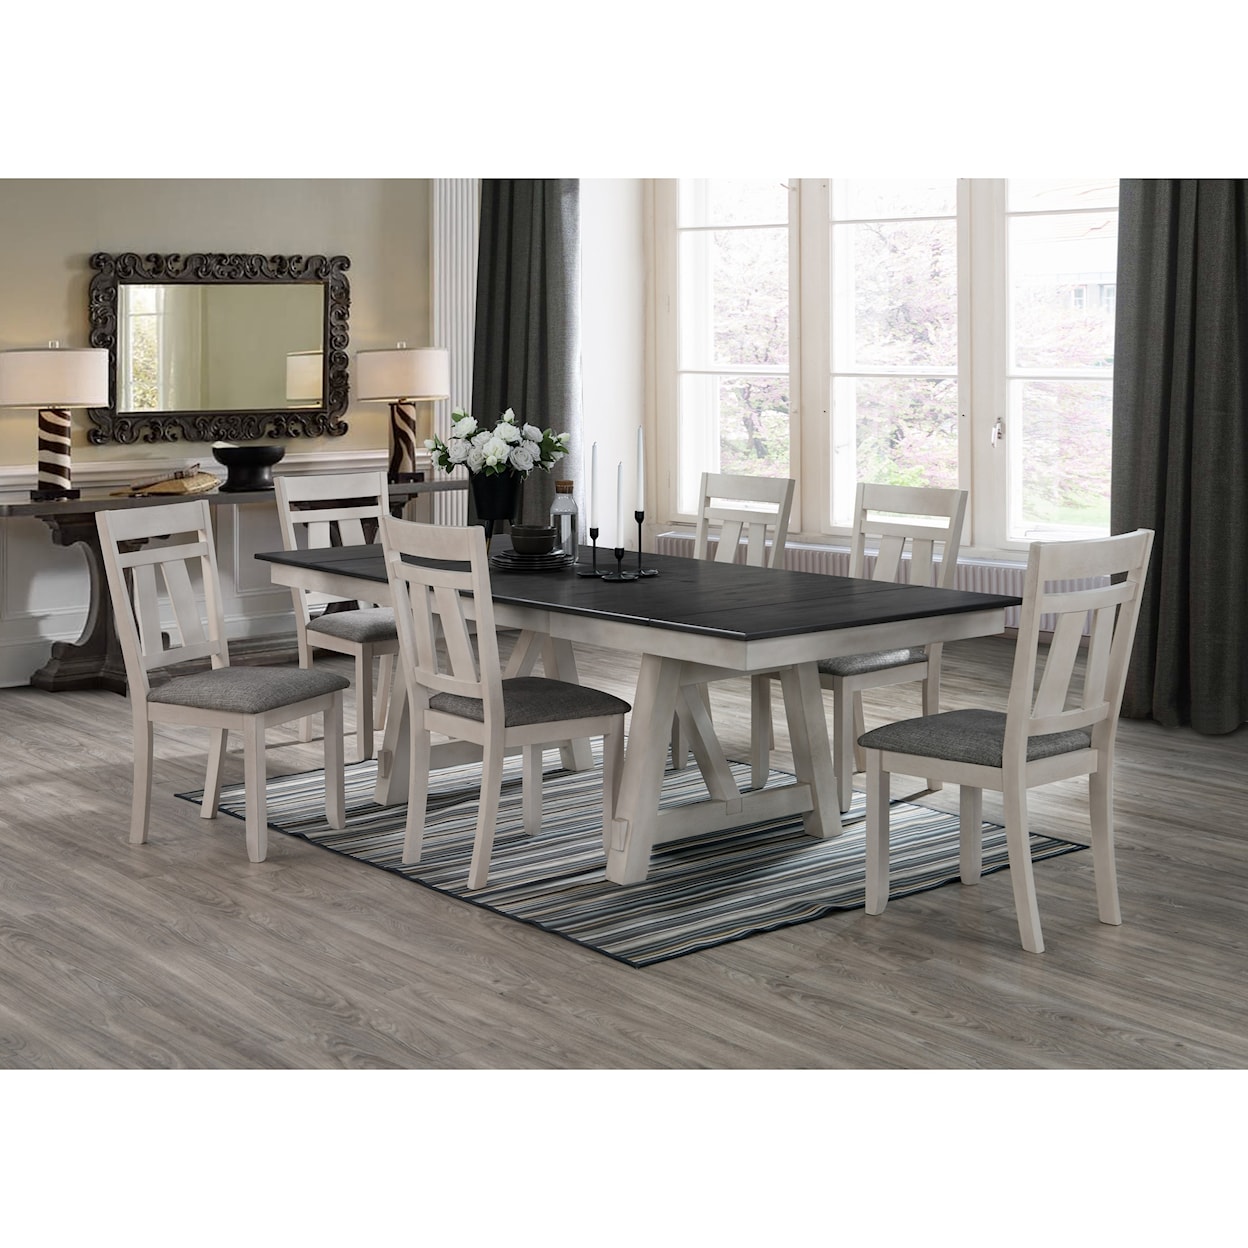 Crown Mark Maribelle 7-Piece Table and Chair Set